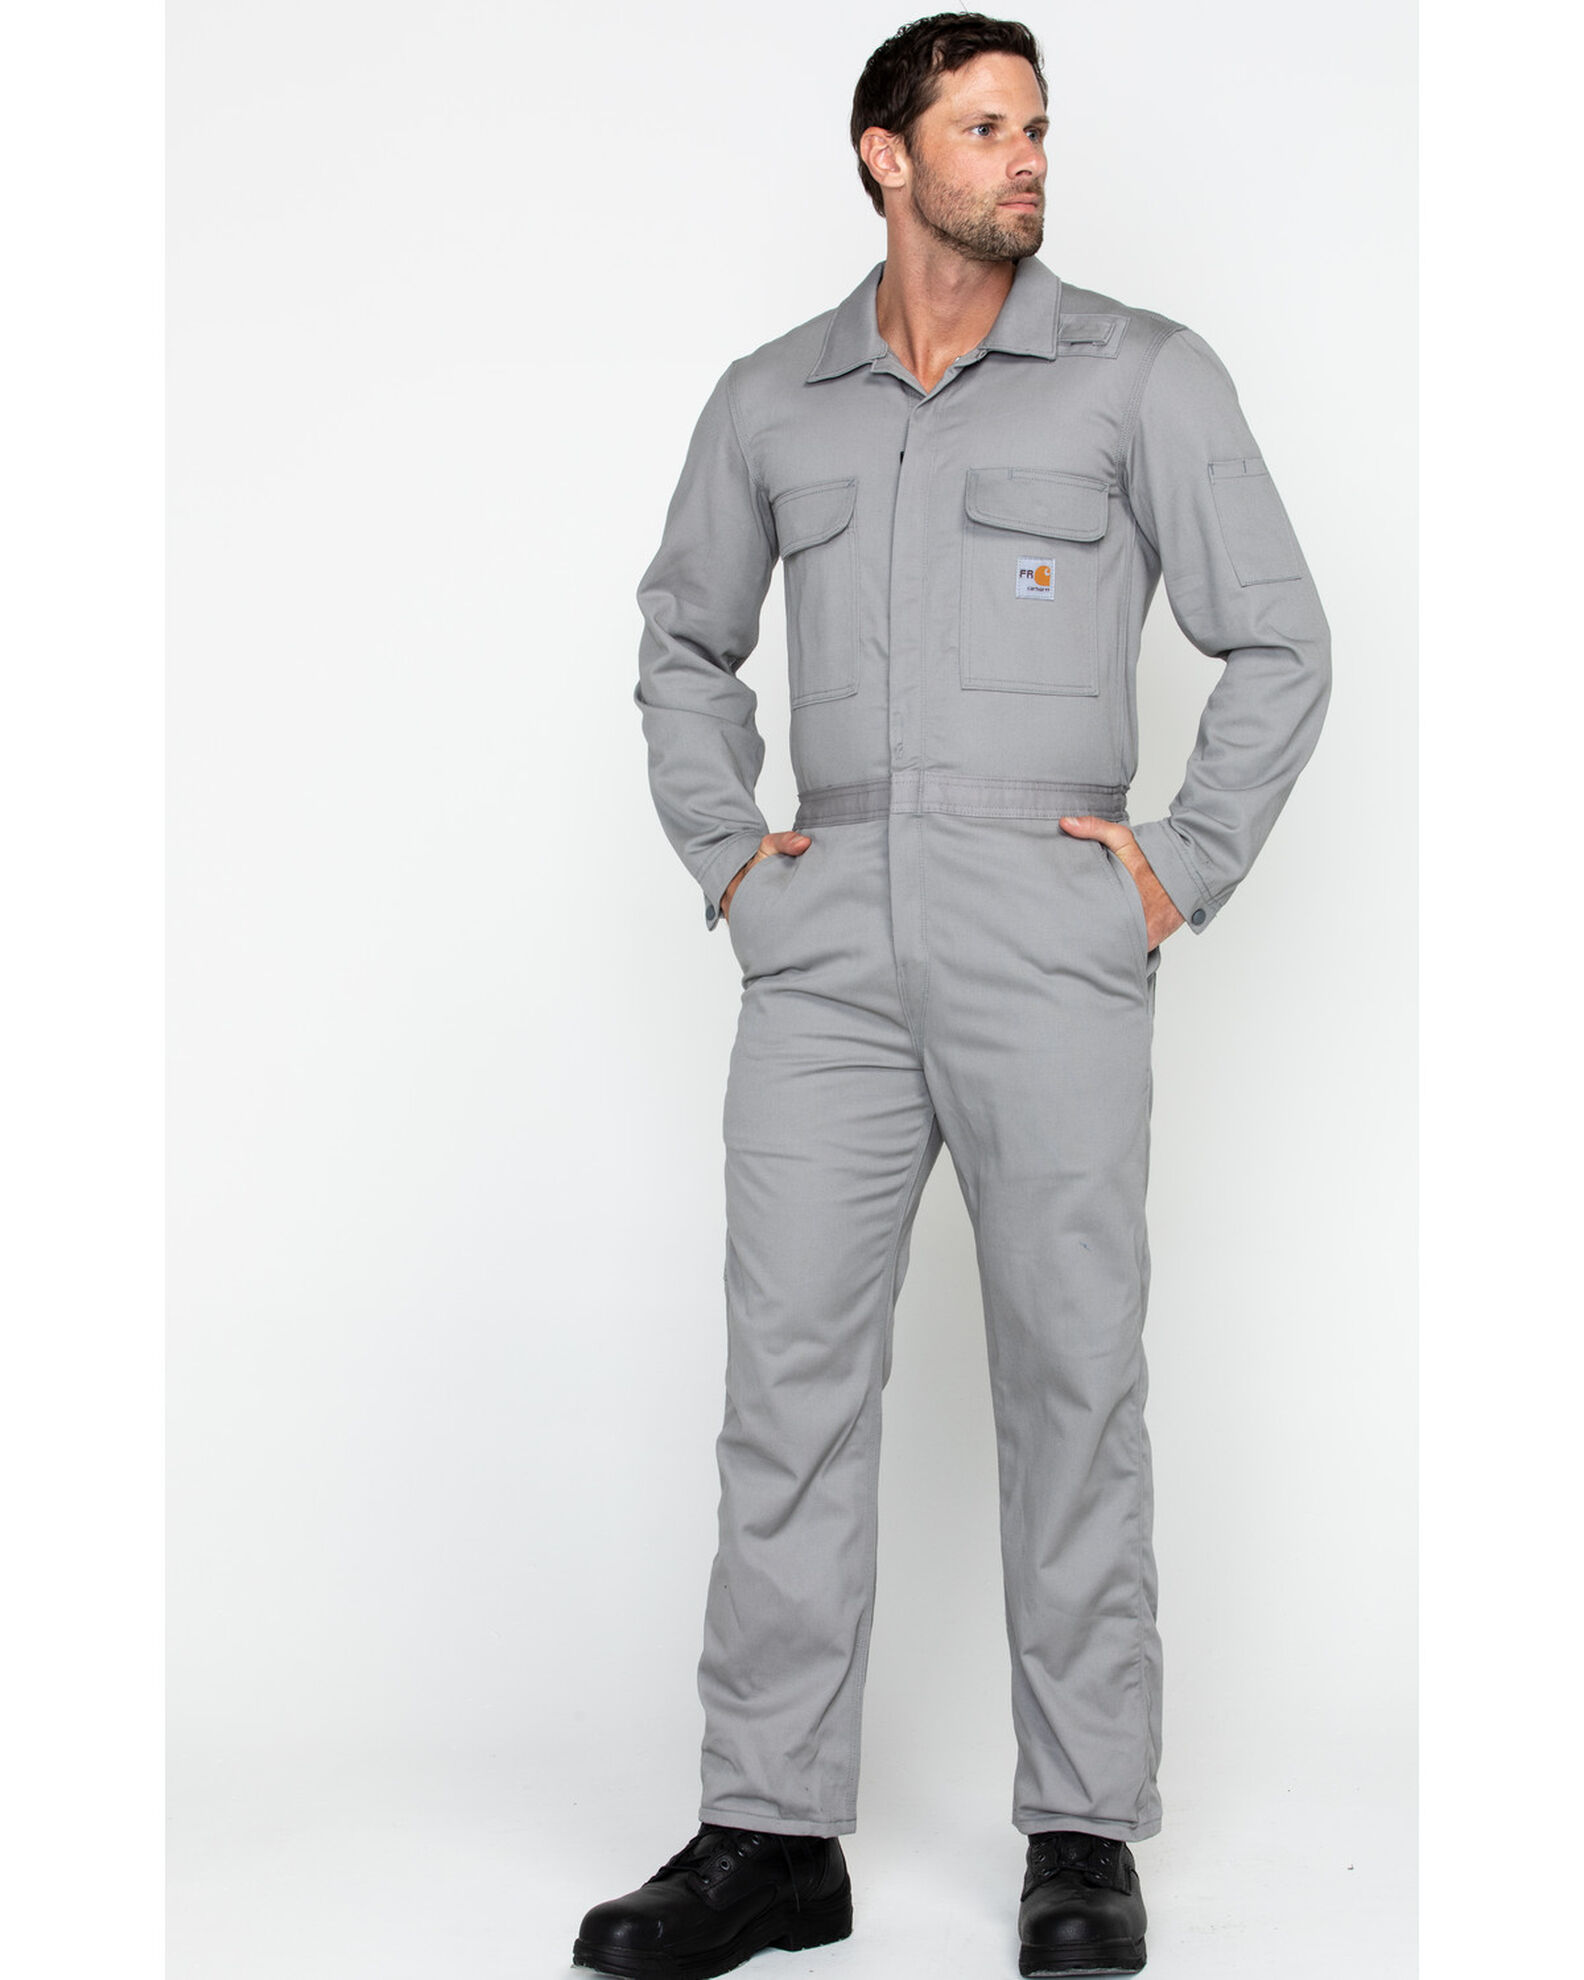 Carhartt Men's Big & Tall Flame Resistant Work Coverall